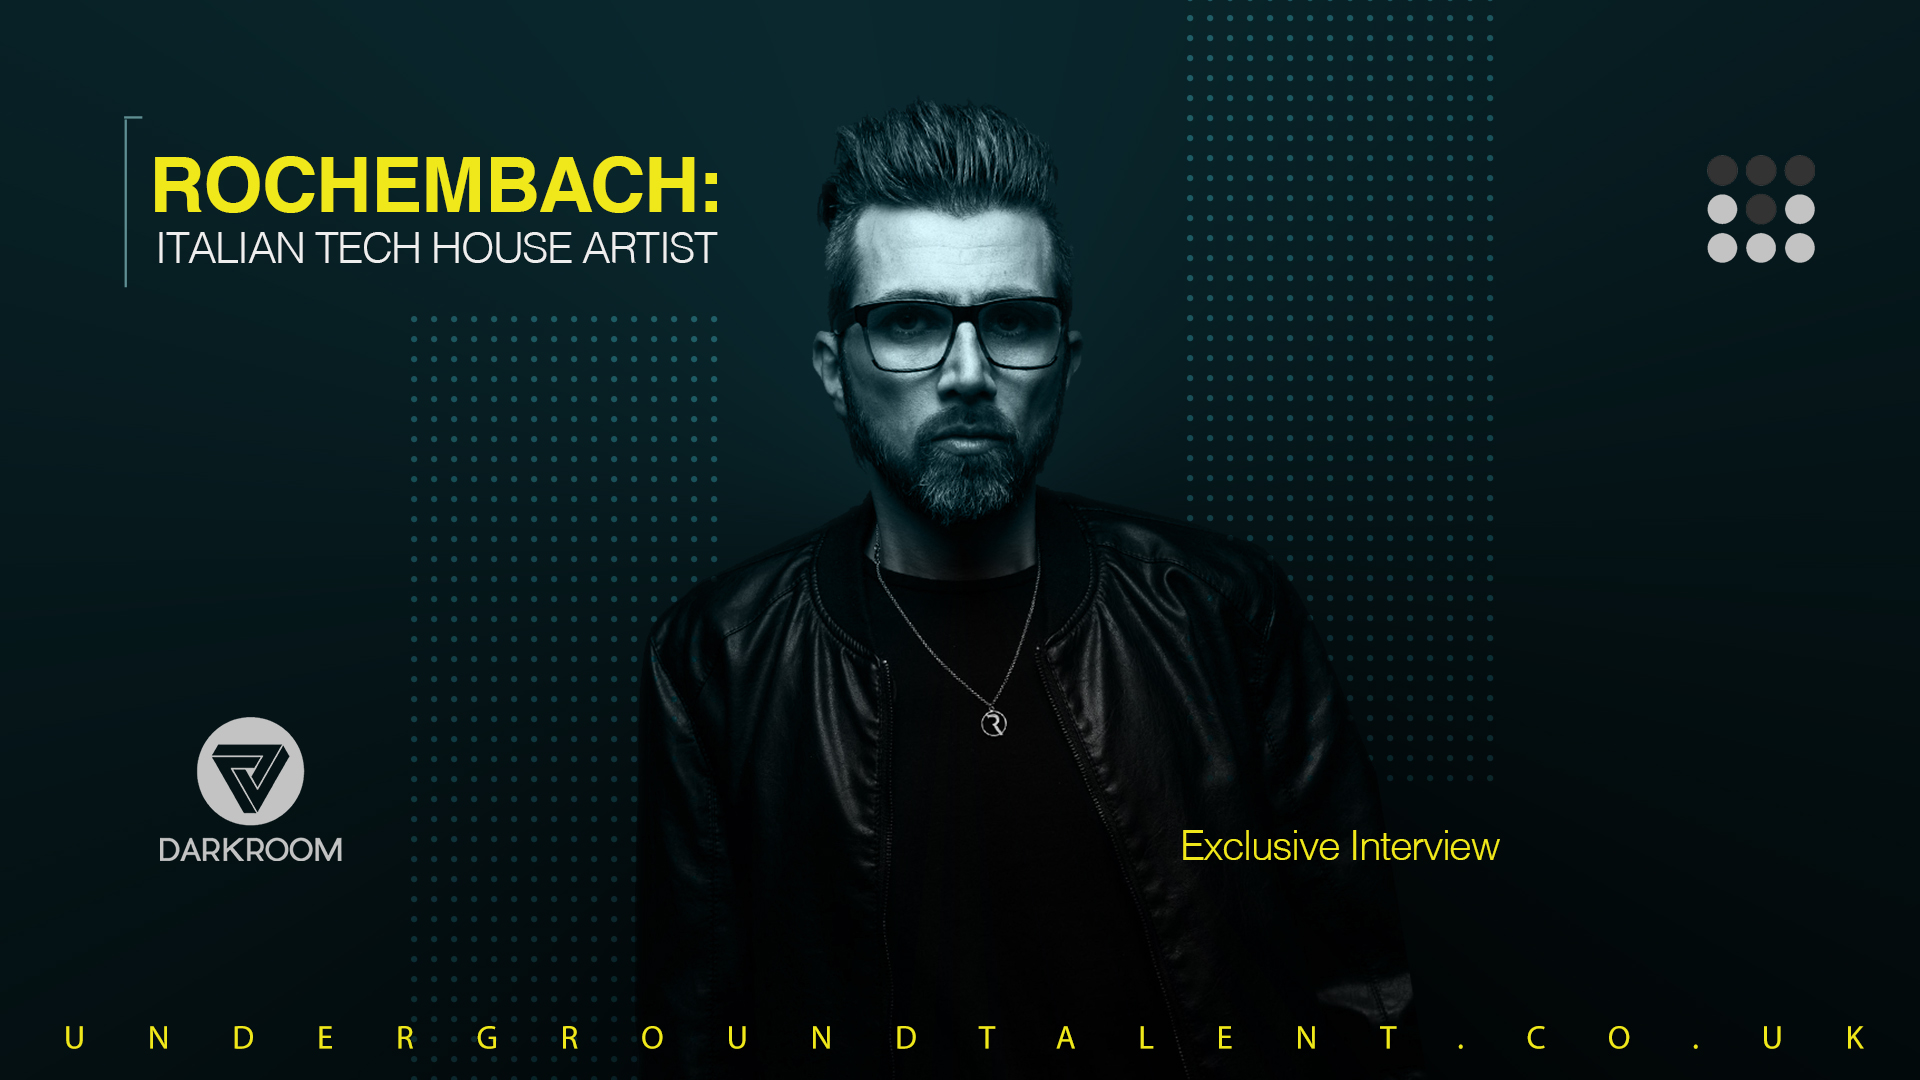 ROCHEMBACH: Exclusive Interview with the Italian Tech House Artist 